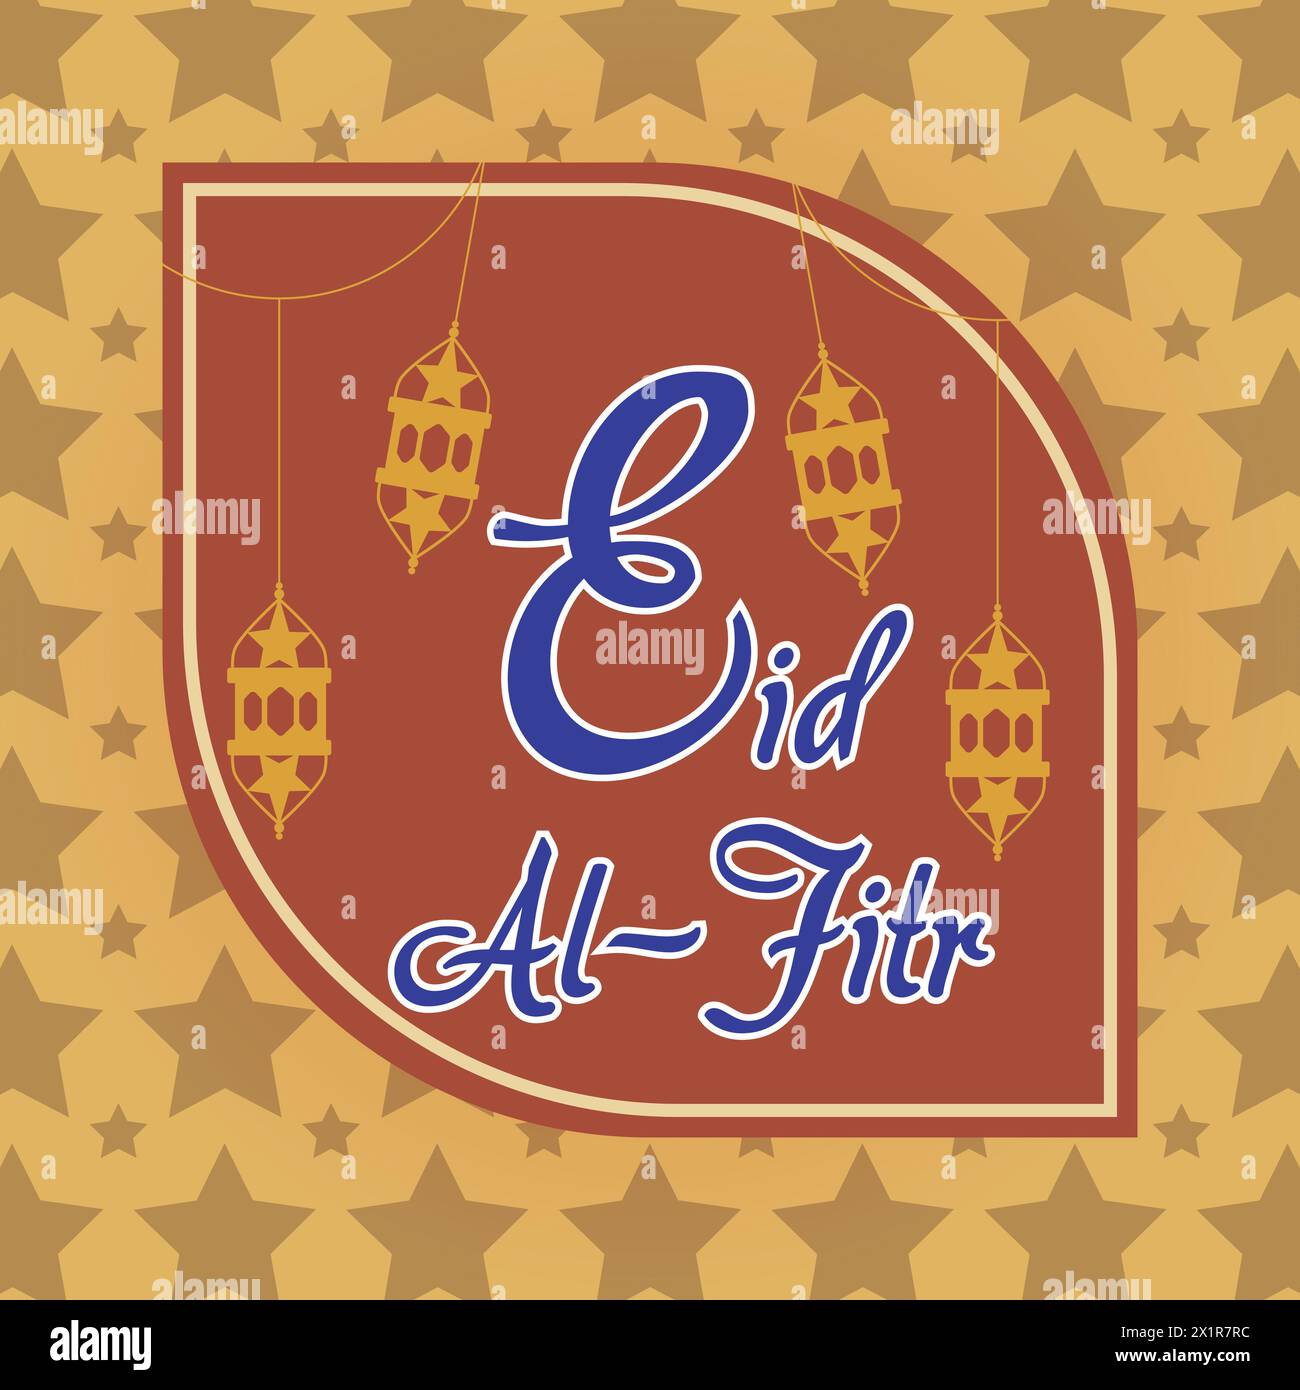 Celebrate the joyous occasion of Eid Al-Fitr with this elegant vector! A radiant crescent moon and intricate lantern adorn a royal blue backdrop, fram Stock Vector